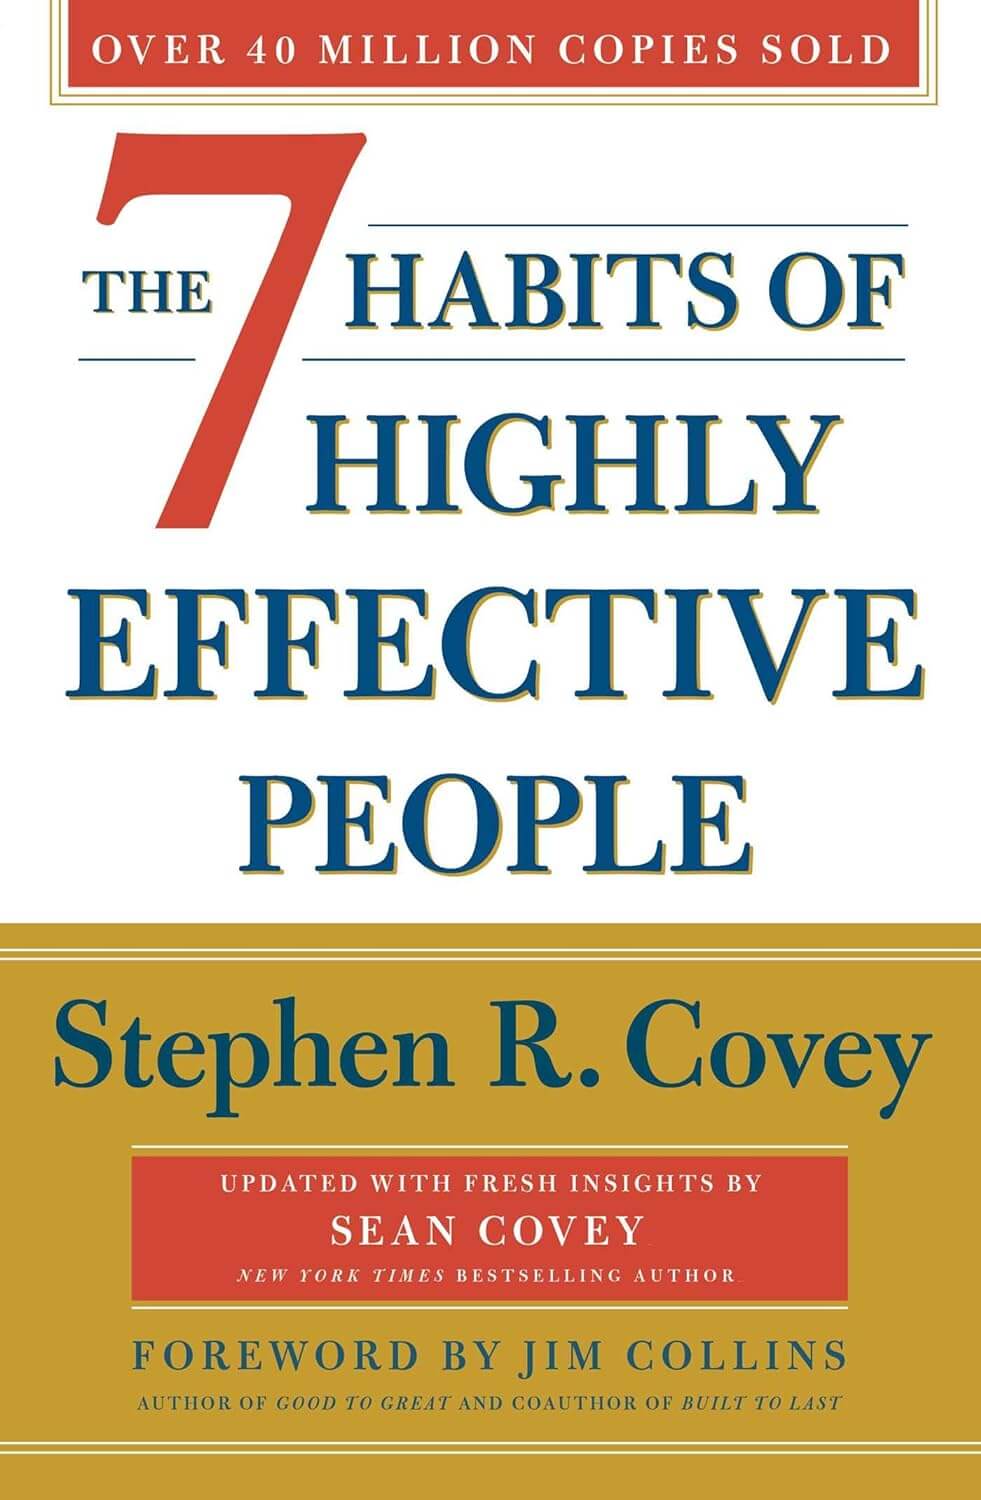 Book cover, The 7 Habits of Highly Effective People by Stephen R. Covey